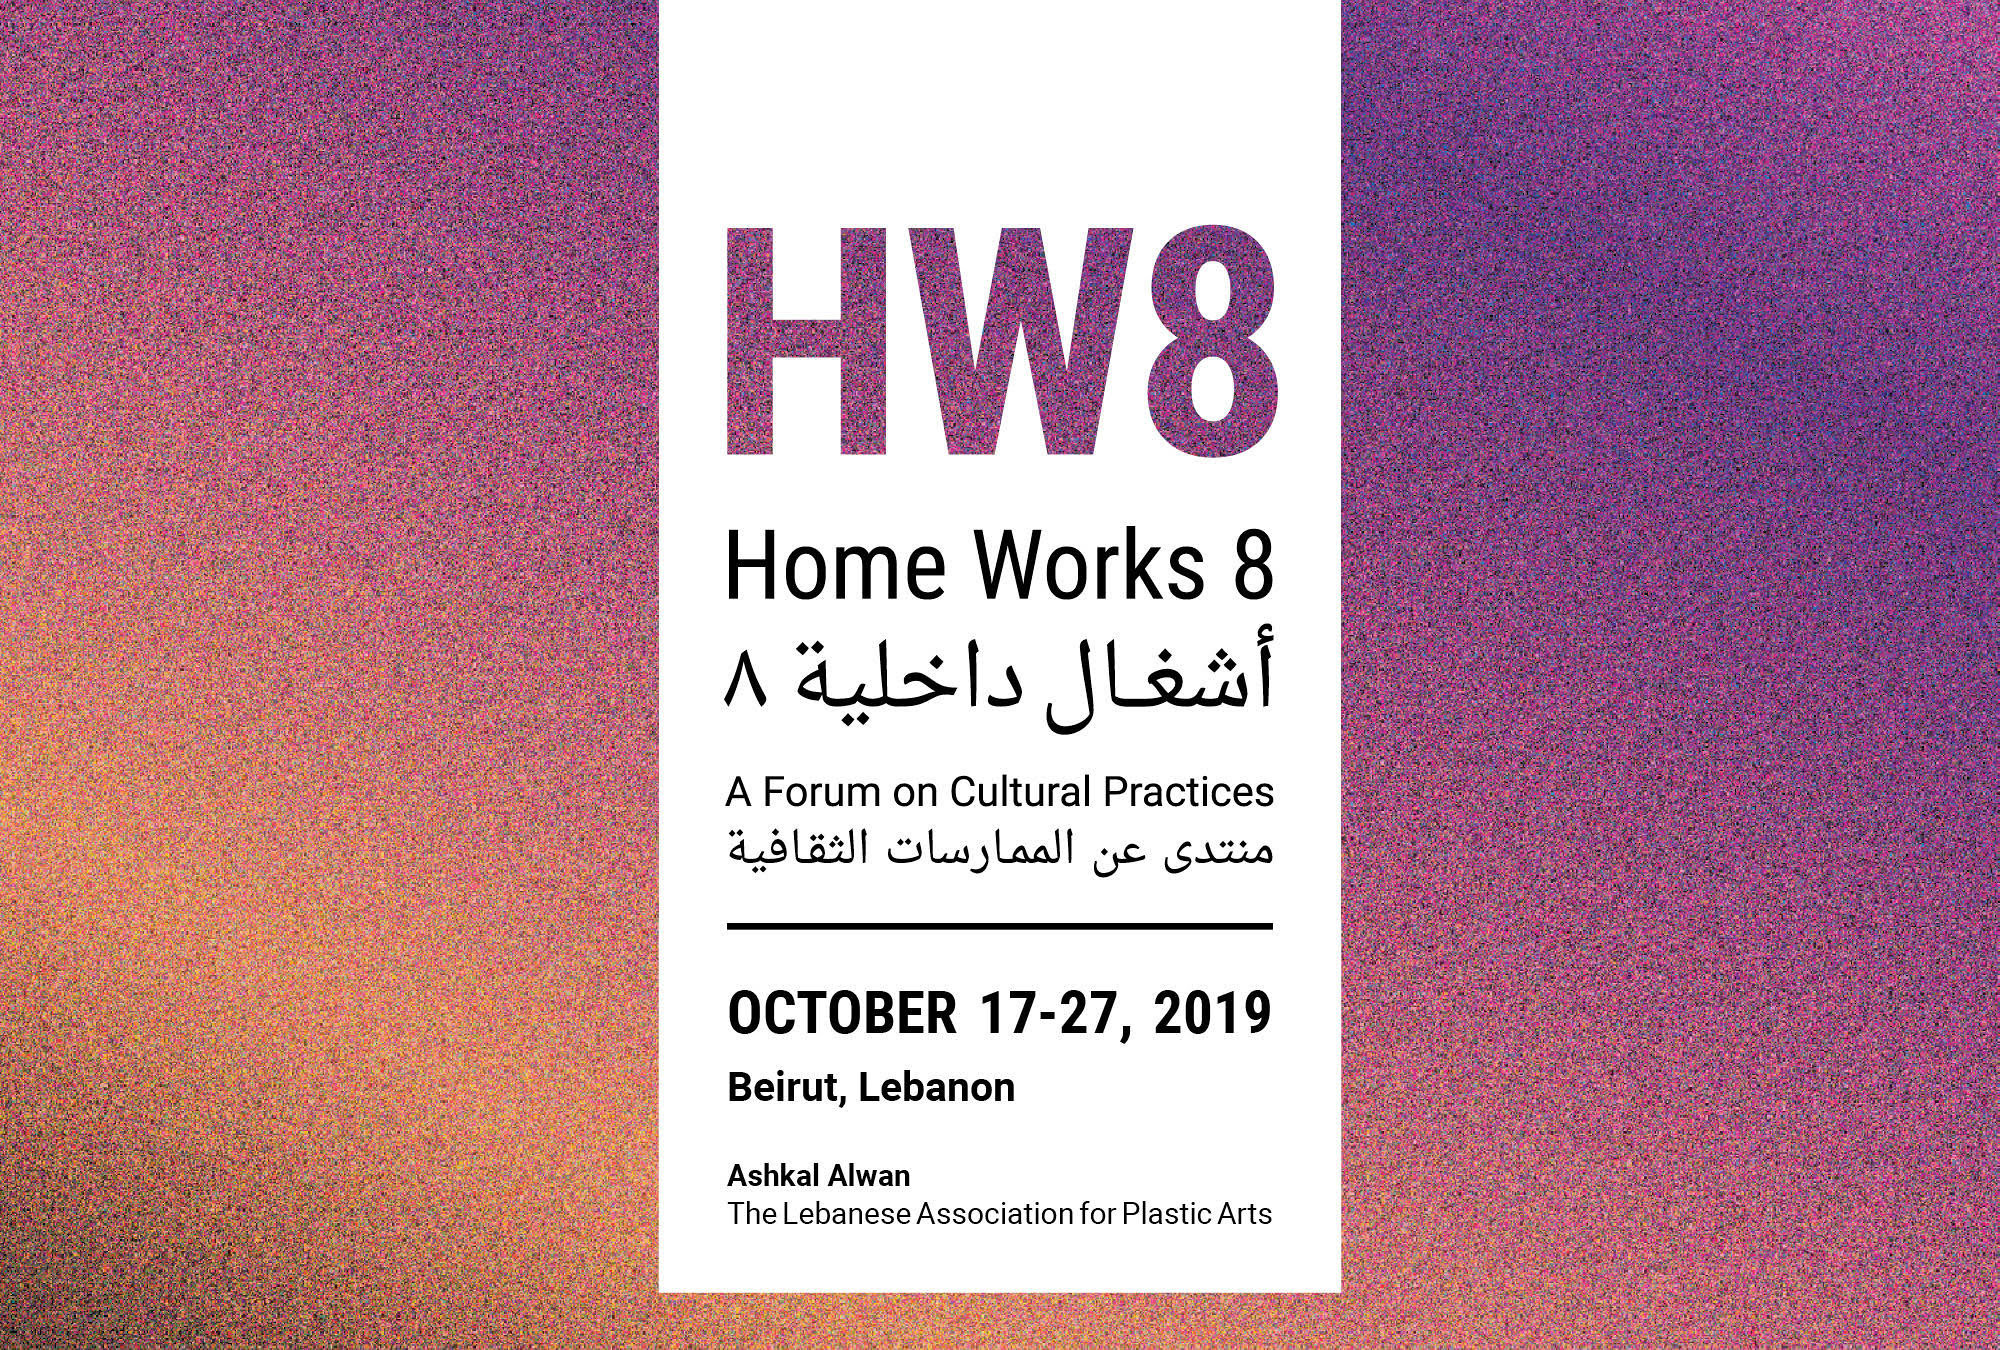 Home Works Forum 8